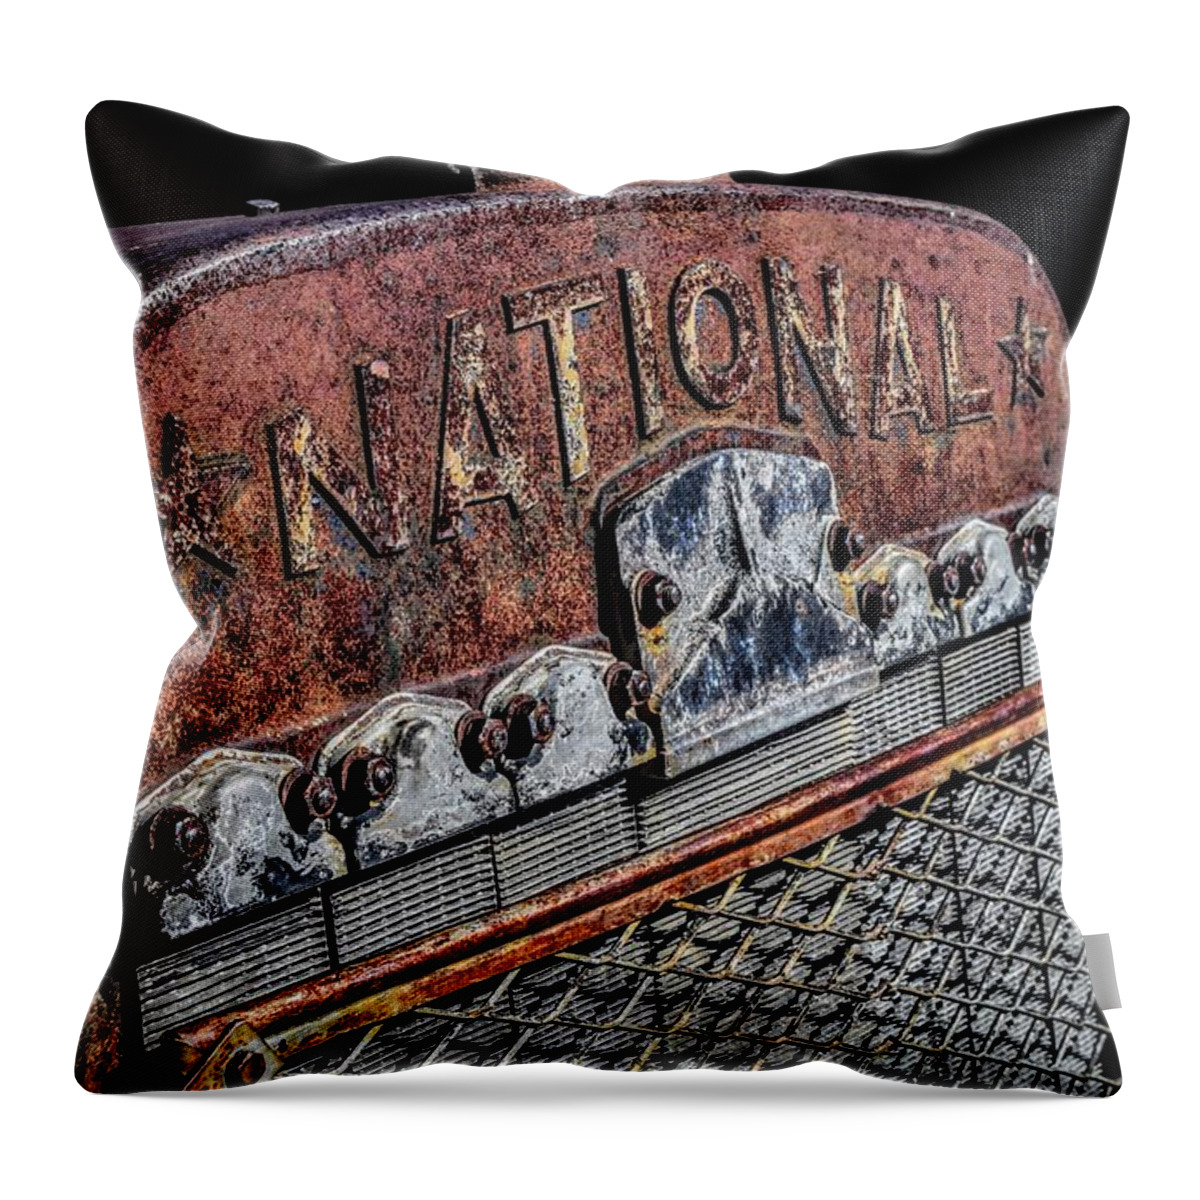 National Throw Pillow featuring the photograph National Rust by Michael Brungardt